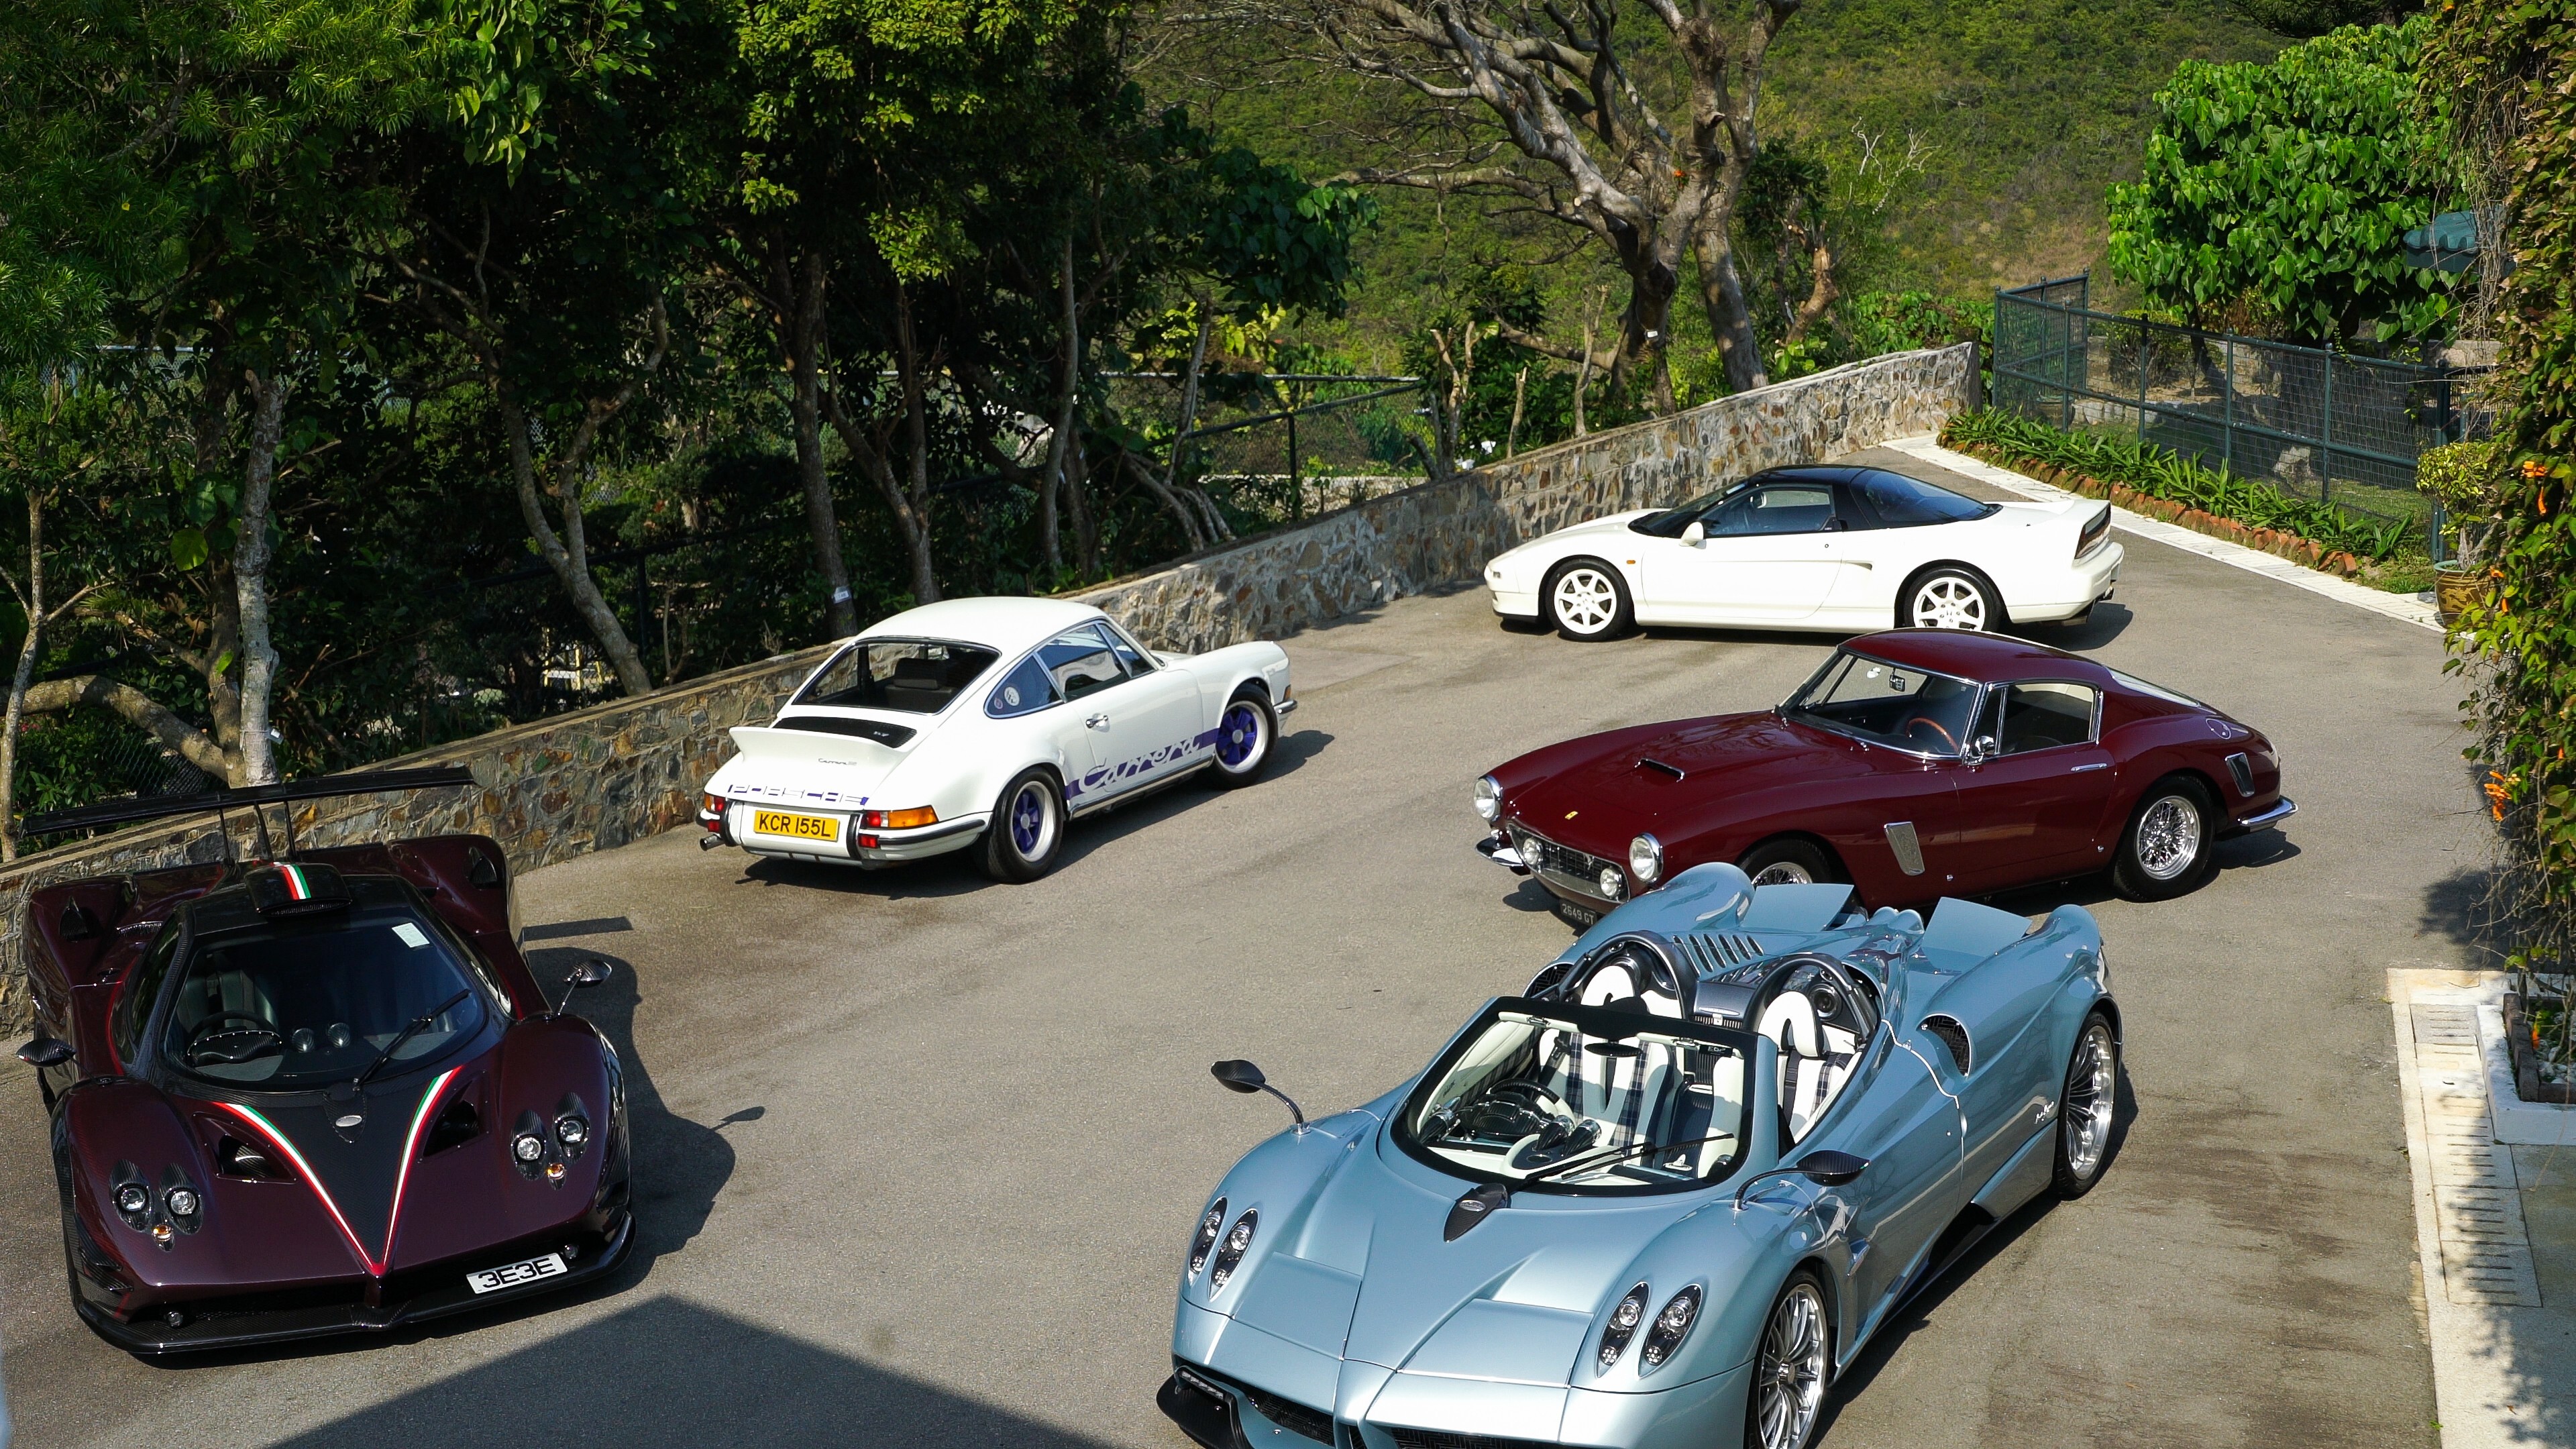 These are just five of the cars that make up Jonathan Hui's swoon-worthy car collection: (from left) a Pagani Zonda Fantasma Evo, a 1973 Porsche Carrera 2.7 R.S, a Honda NSX, a 1961 Ferrari 250 short wheelbase and a Pagani Huayra Roadster. Photo: Bridgette Hall